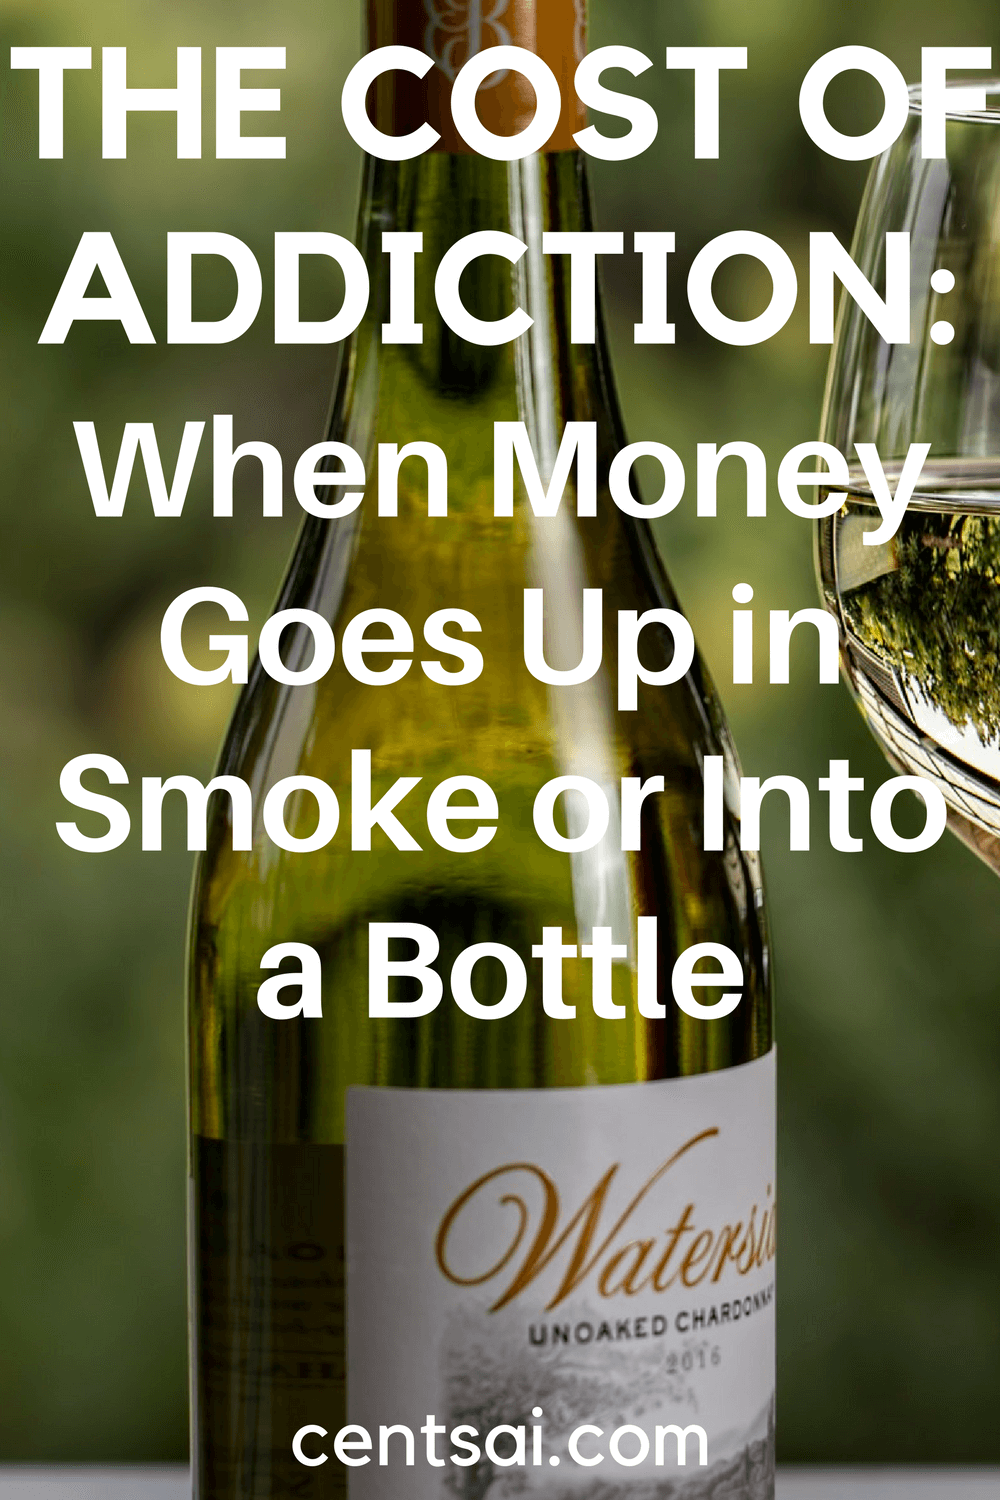 The Cost of Addiction: When Money Goes Up in Smoke or Into a Bottle